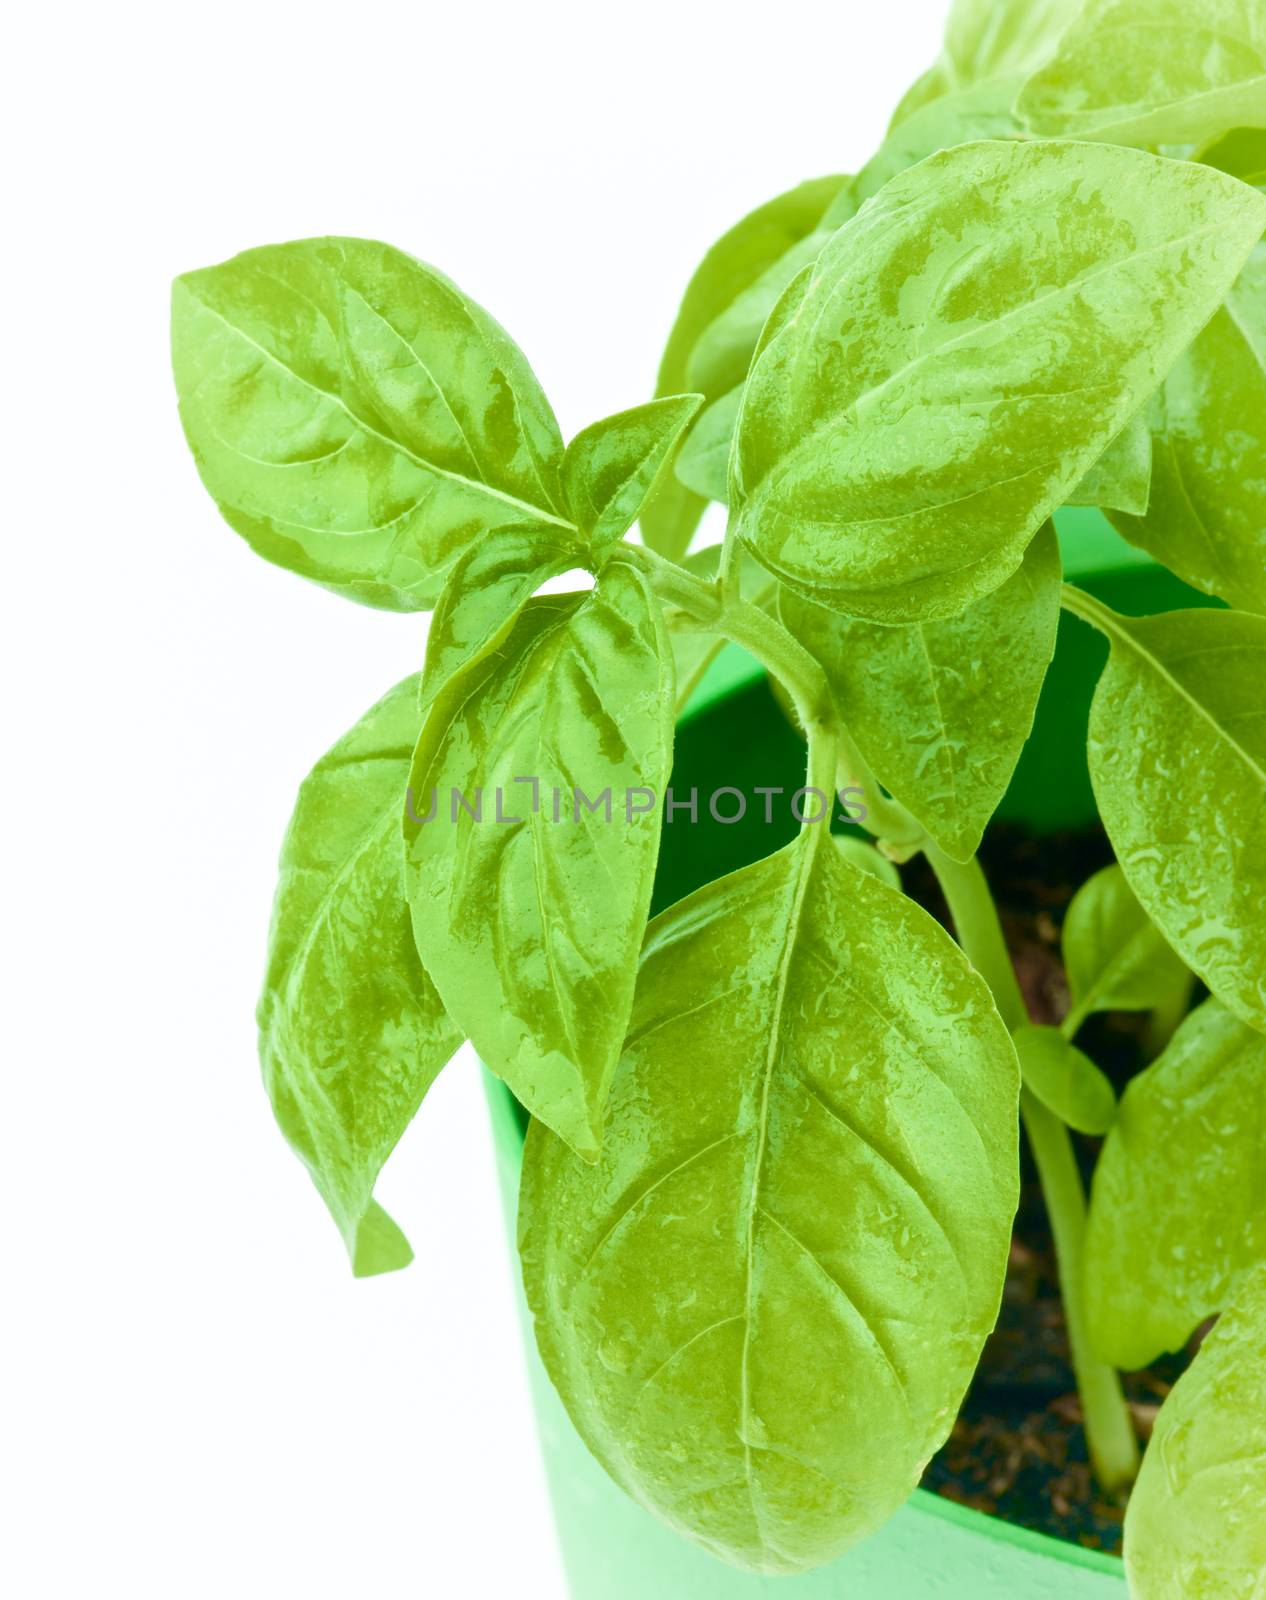 Leafs of Fresh Green Lush Foliage Basil with Water Drops in Green Pot Cross Section on White background